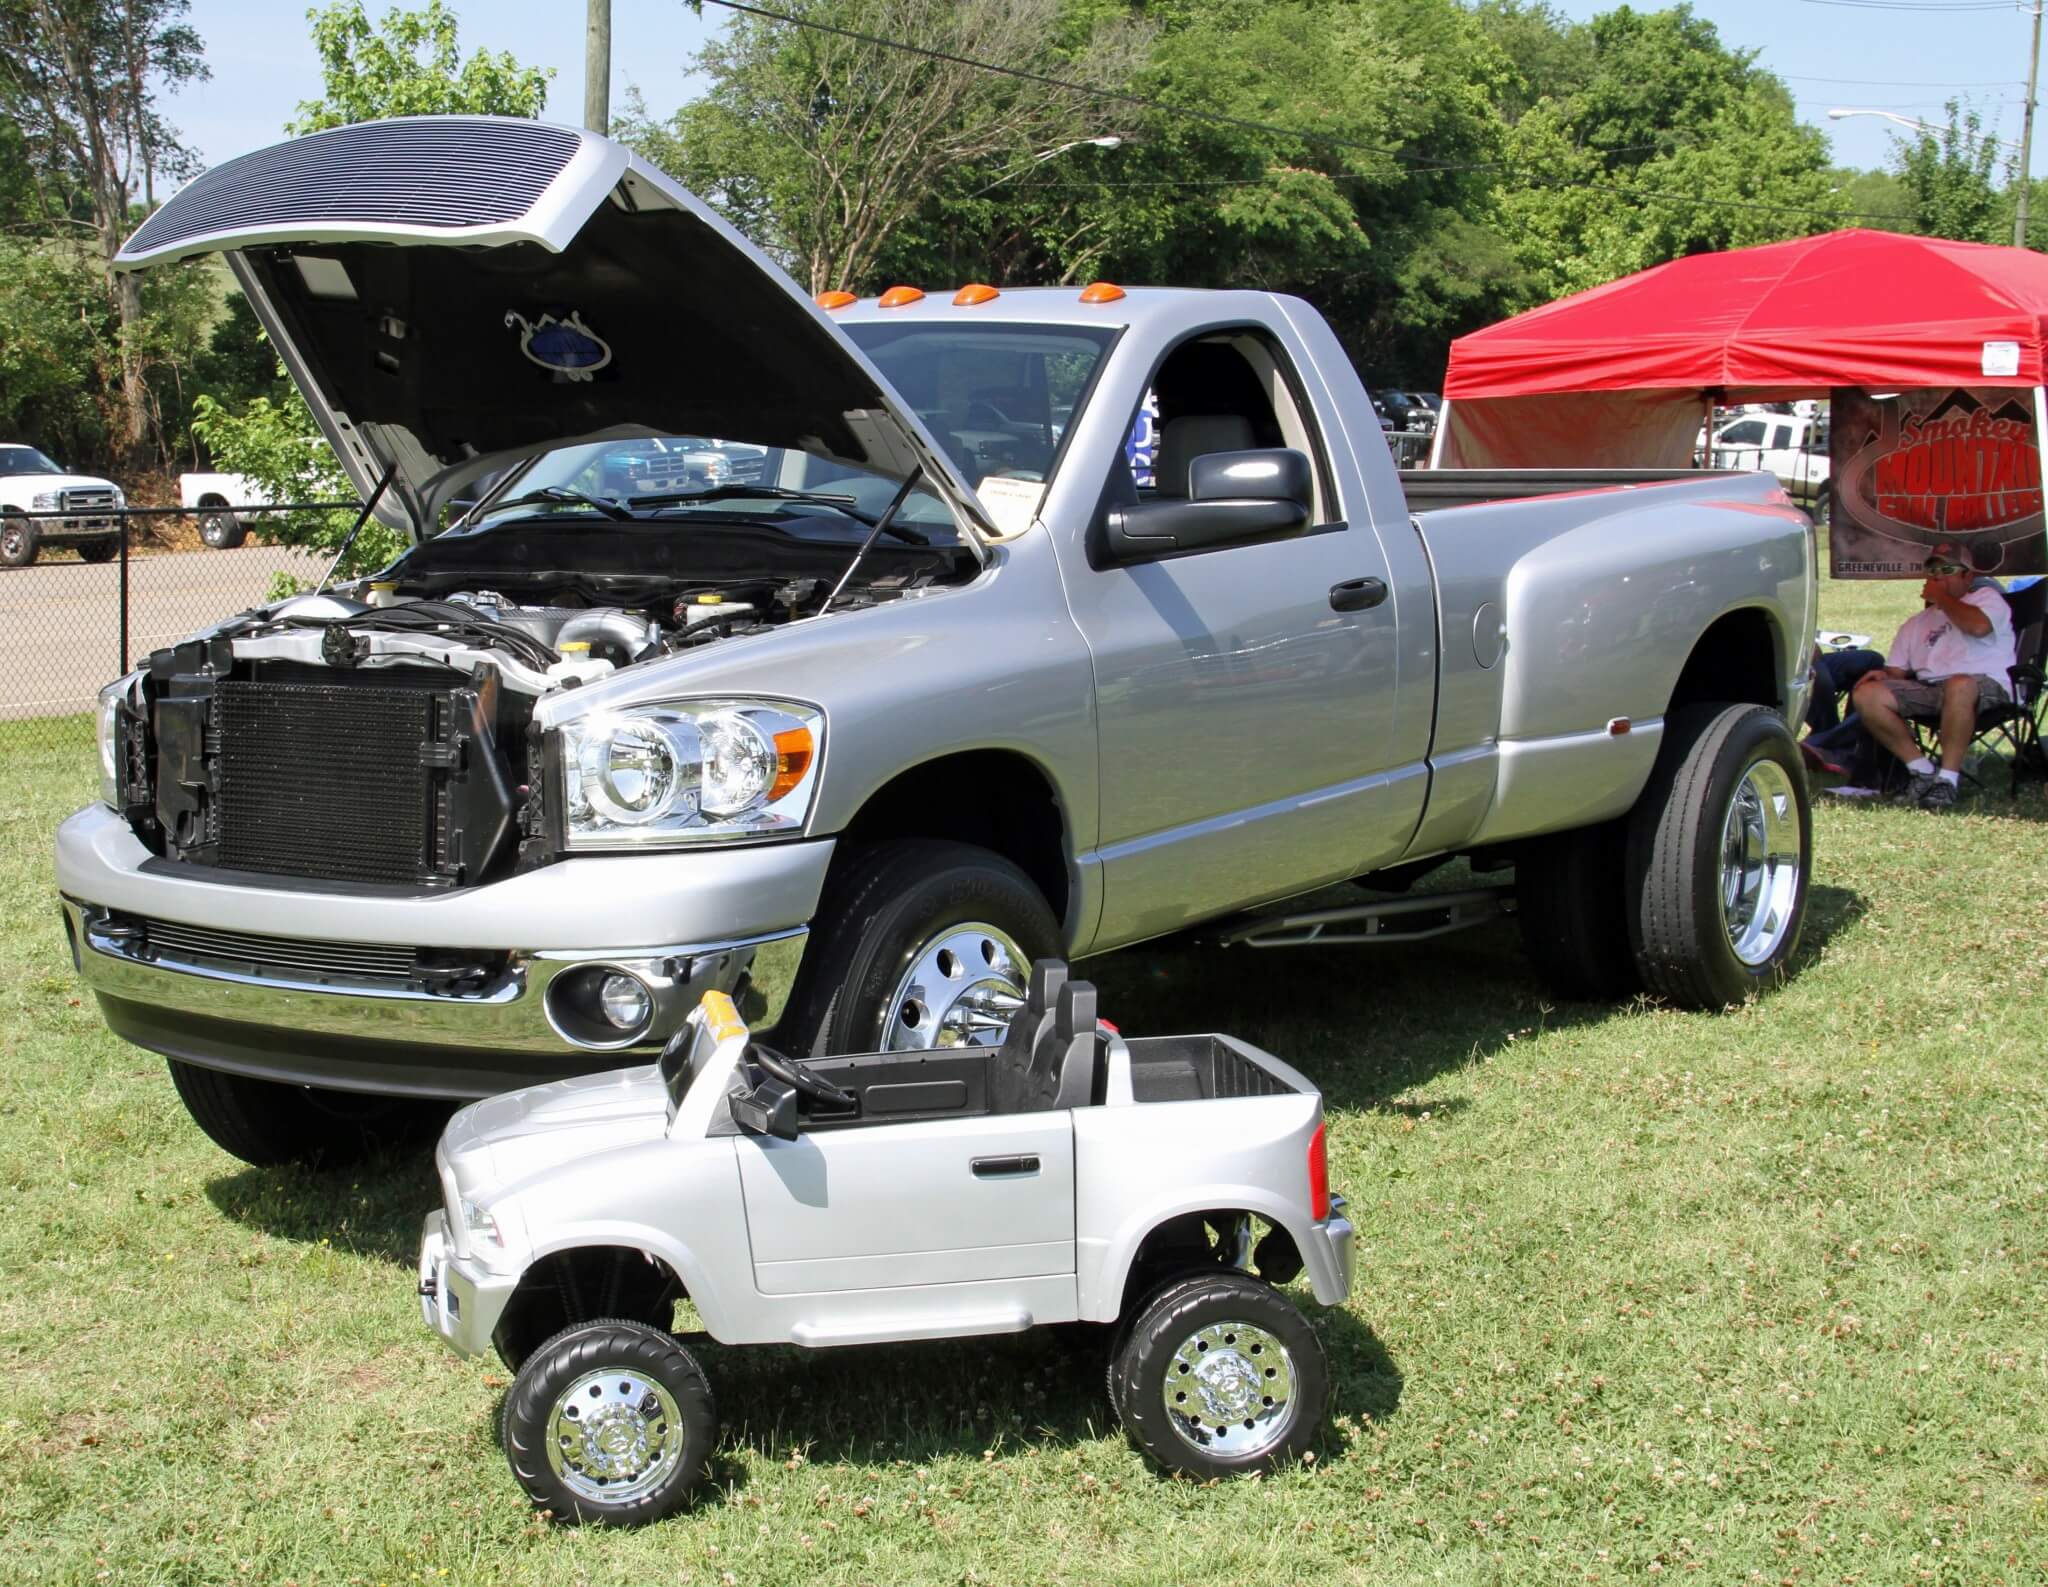 Some Show ’N’ Shiners take things more seriously than others with their customized Power Wheels trucks to match their full-scale rides—another cool way to get kids into diesel trucks at an early age.